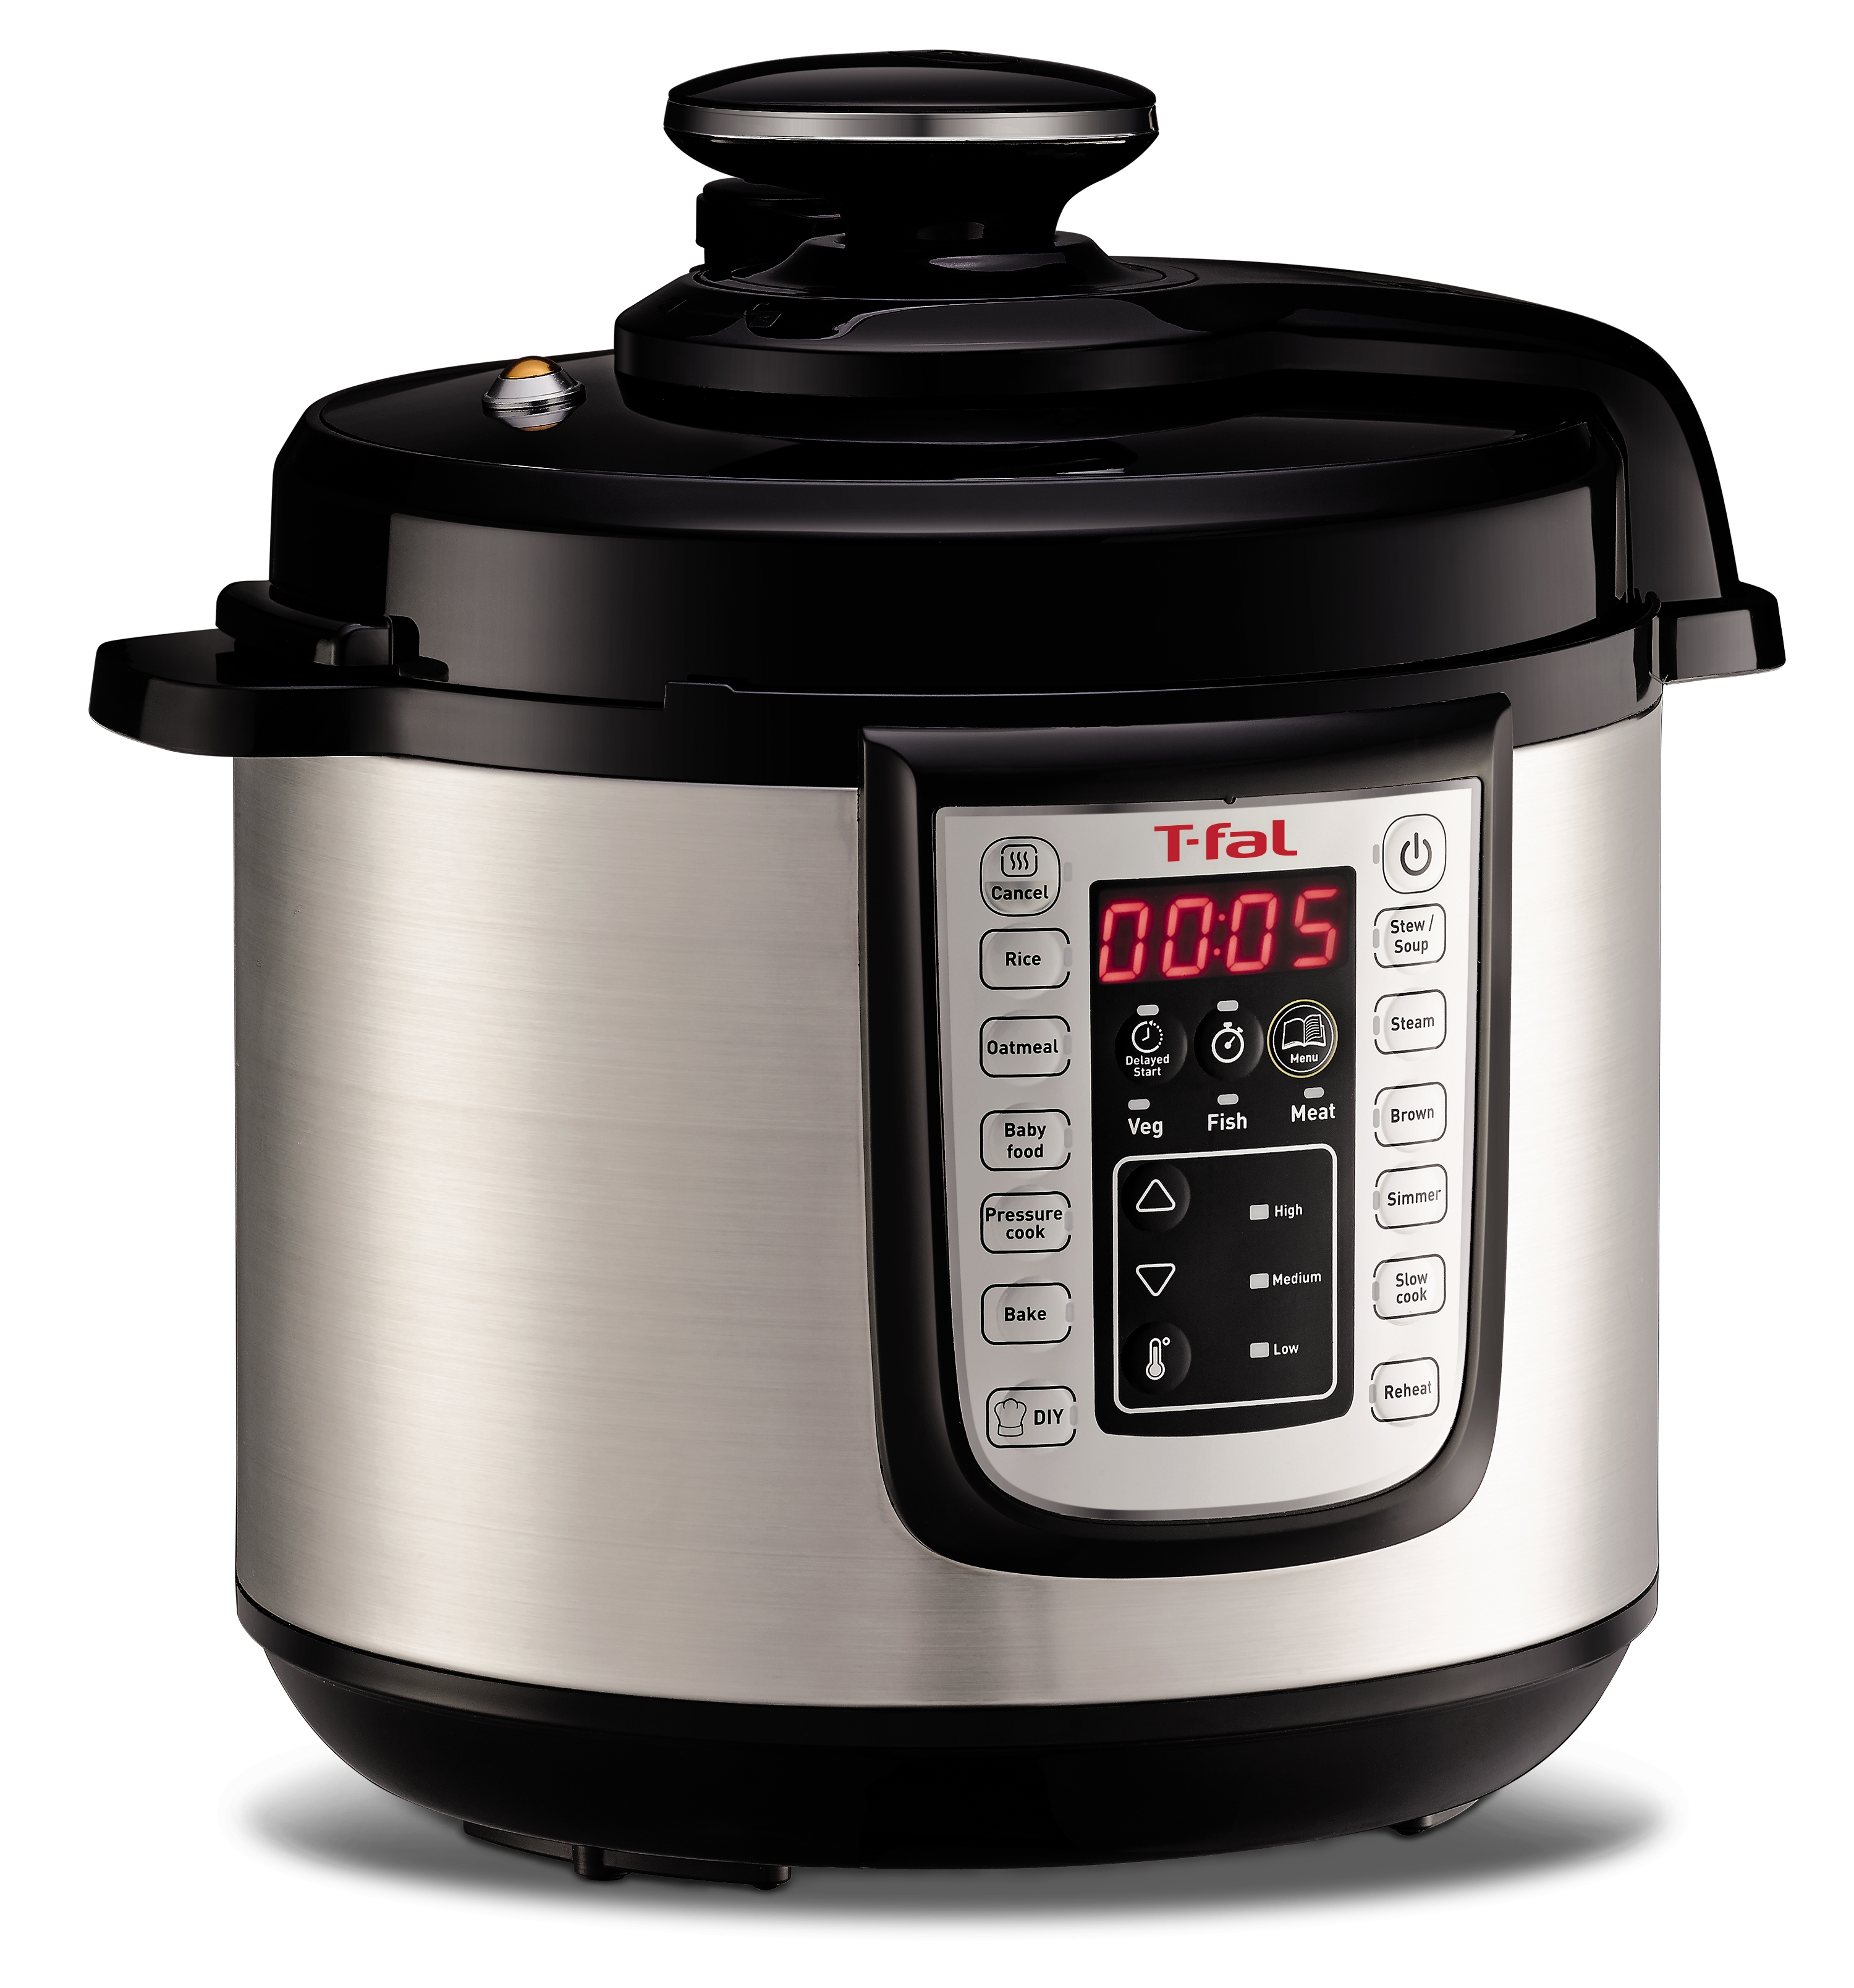 Tfal CY505E51 12-in-1 Programmable Electric Multifunctional Pressure Cooker